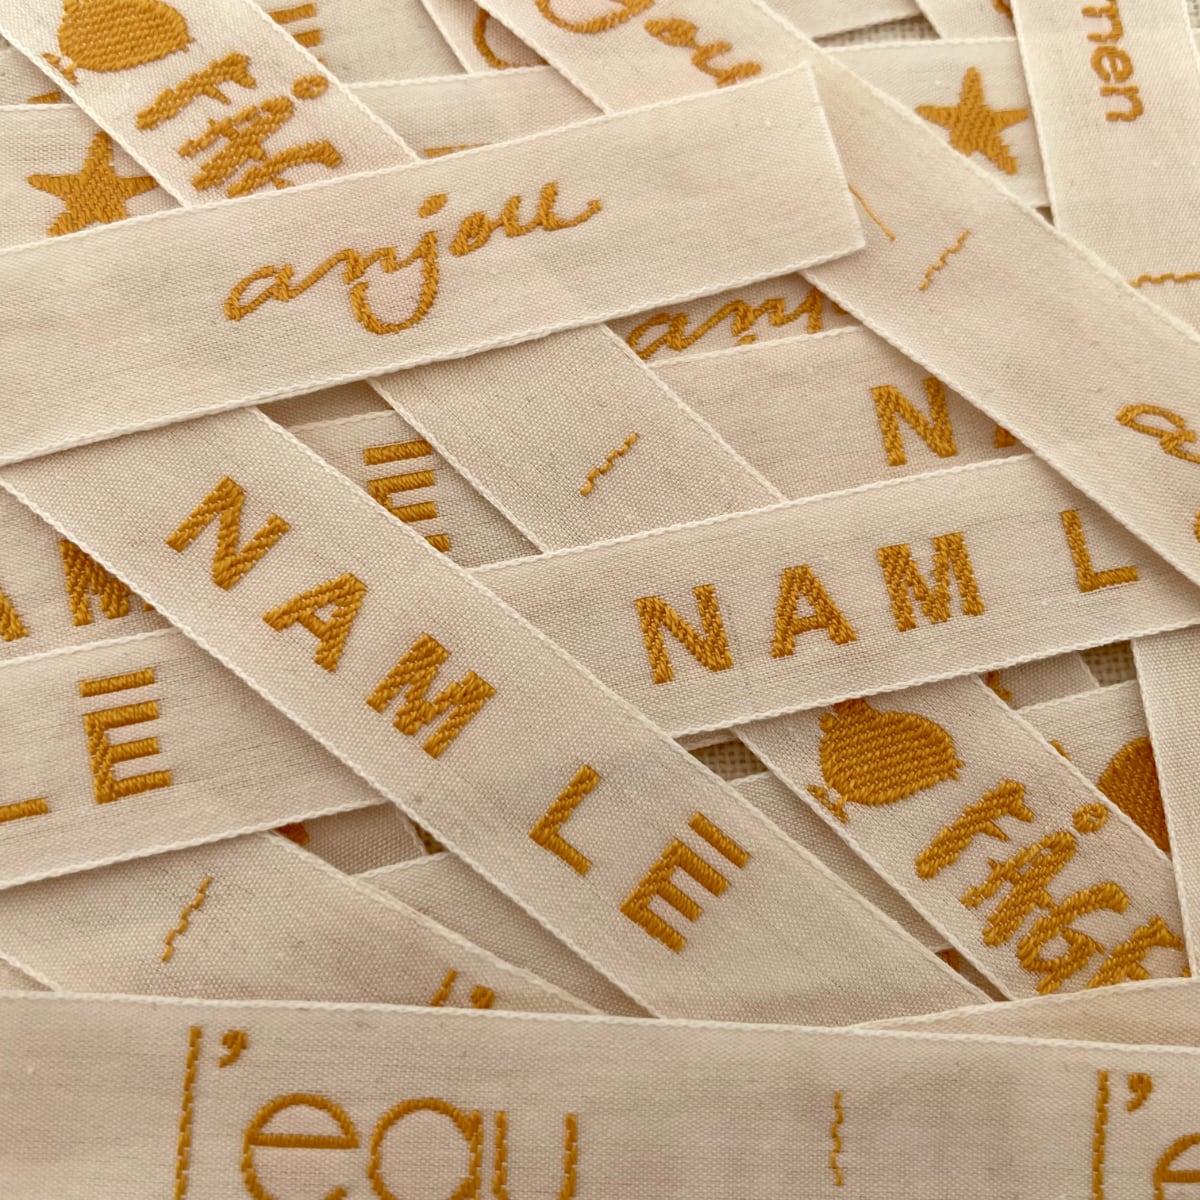 Logo Labels - Beautiful woven clothing labels